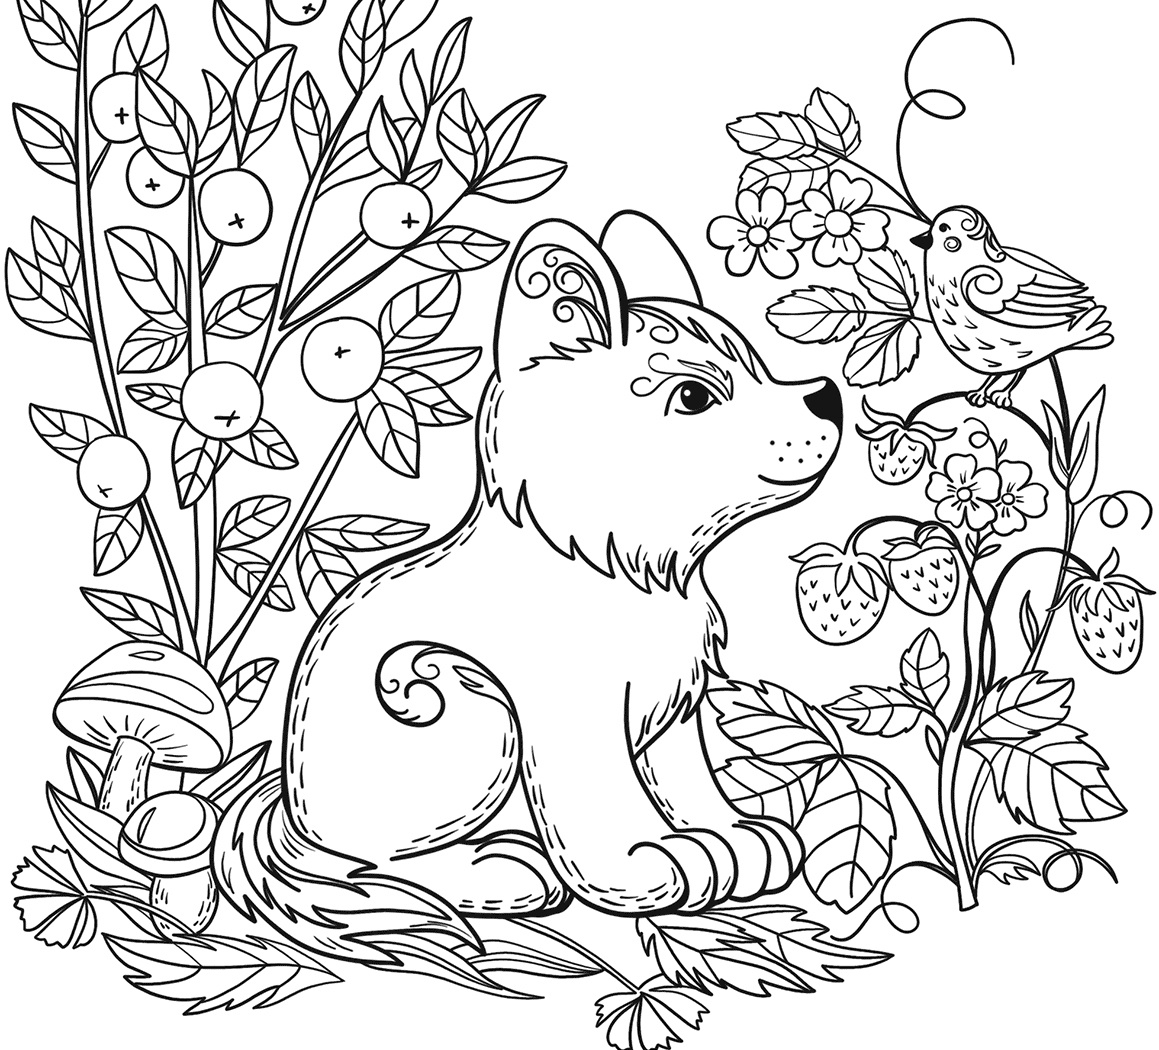 Coloring Ideas : Wild Animal Coloring Sheets Image Inspirations Free - Free Printable Wild Animal Coloring Pages